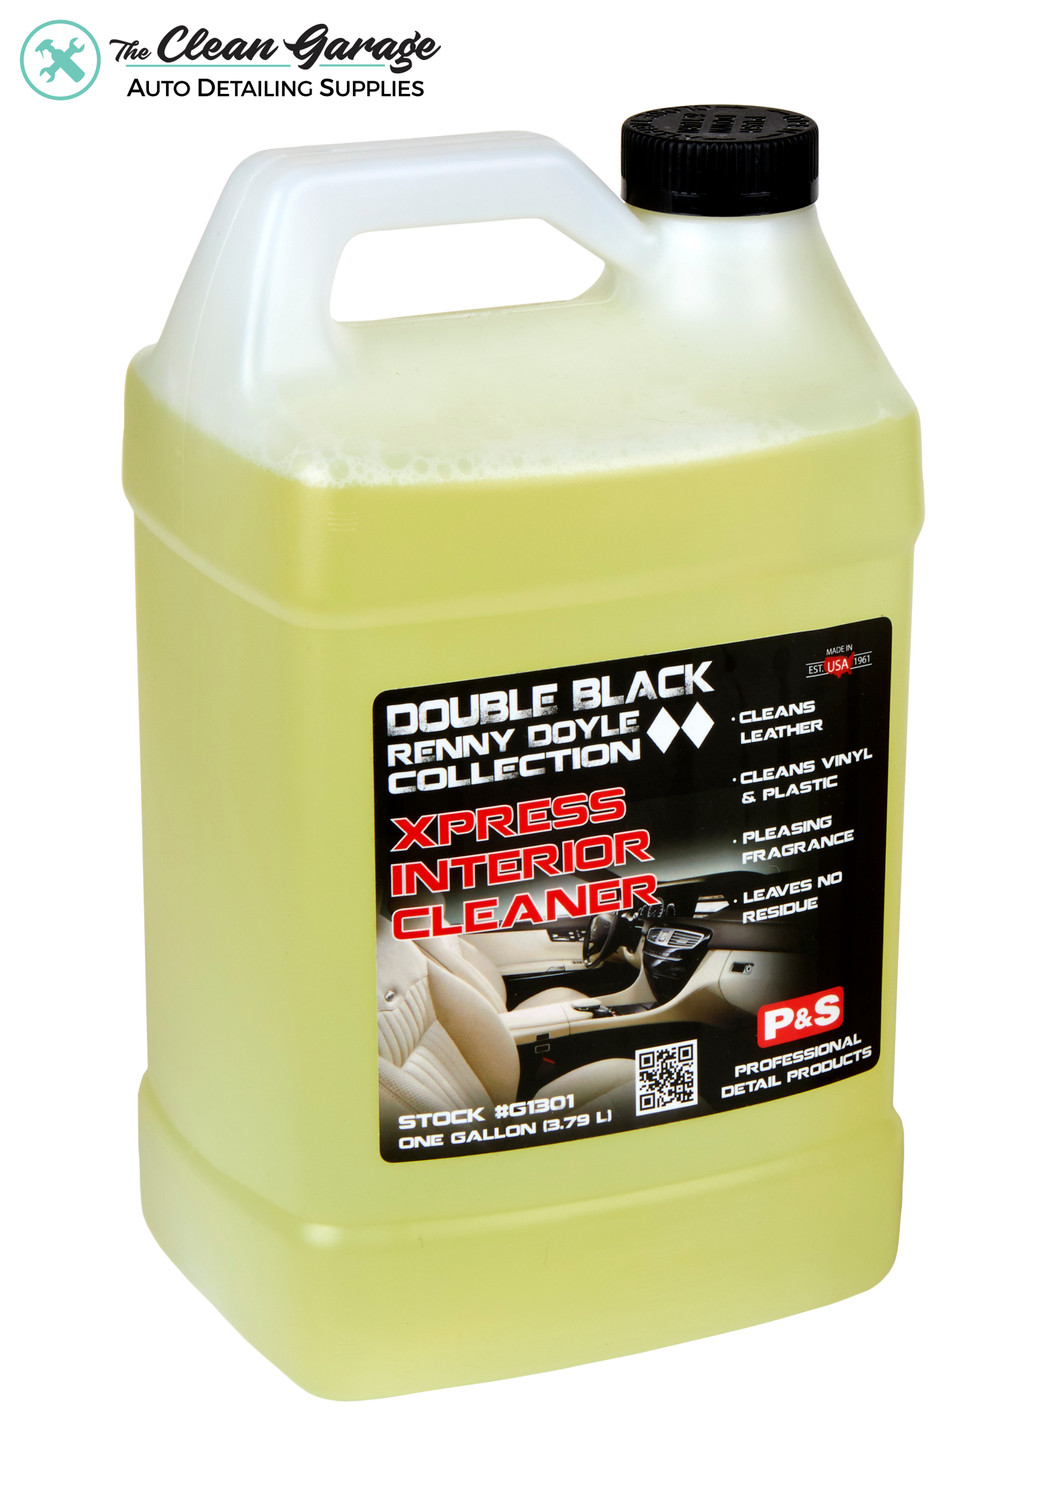  P&S Professional Detail Products - Xpress Interior Cleaner -  Perfect for Cleaning All Vehicle Interior Surfaces of Dirt, Grease, and  Oil; Works on Leather, Vinyl, and Plastic (1 Gallon + 1 Quart) : Automotive